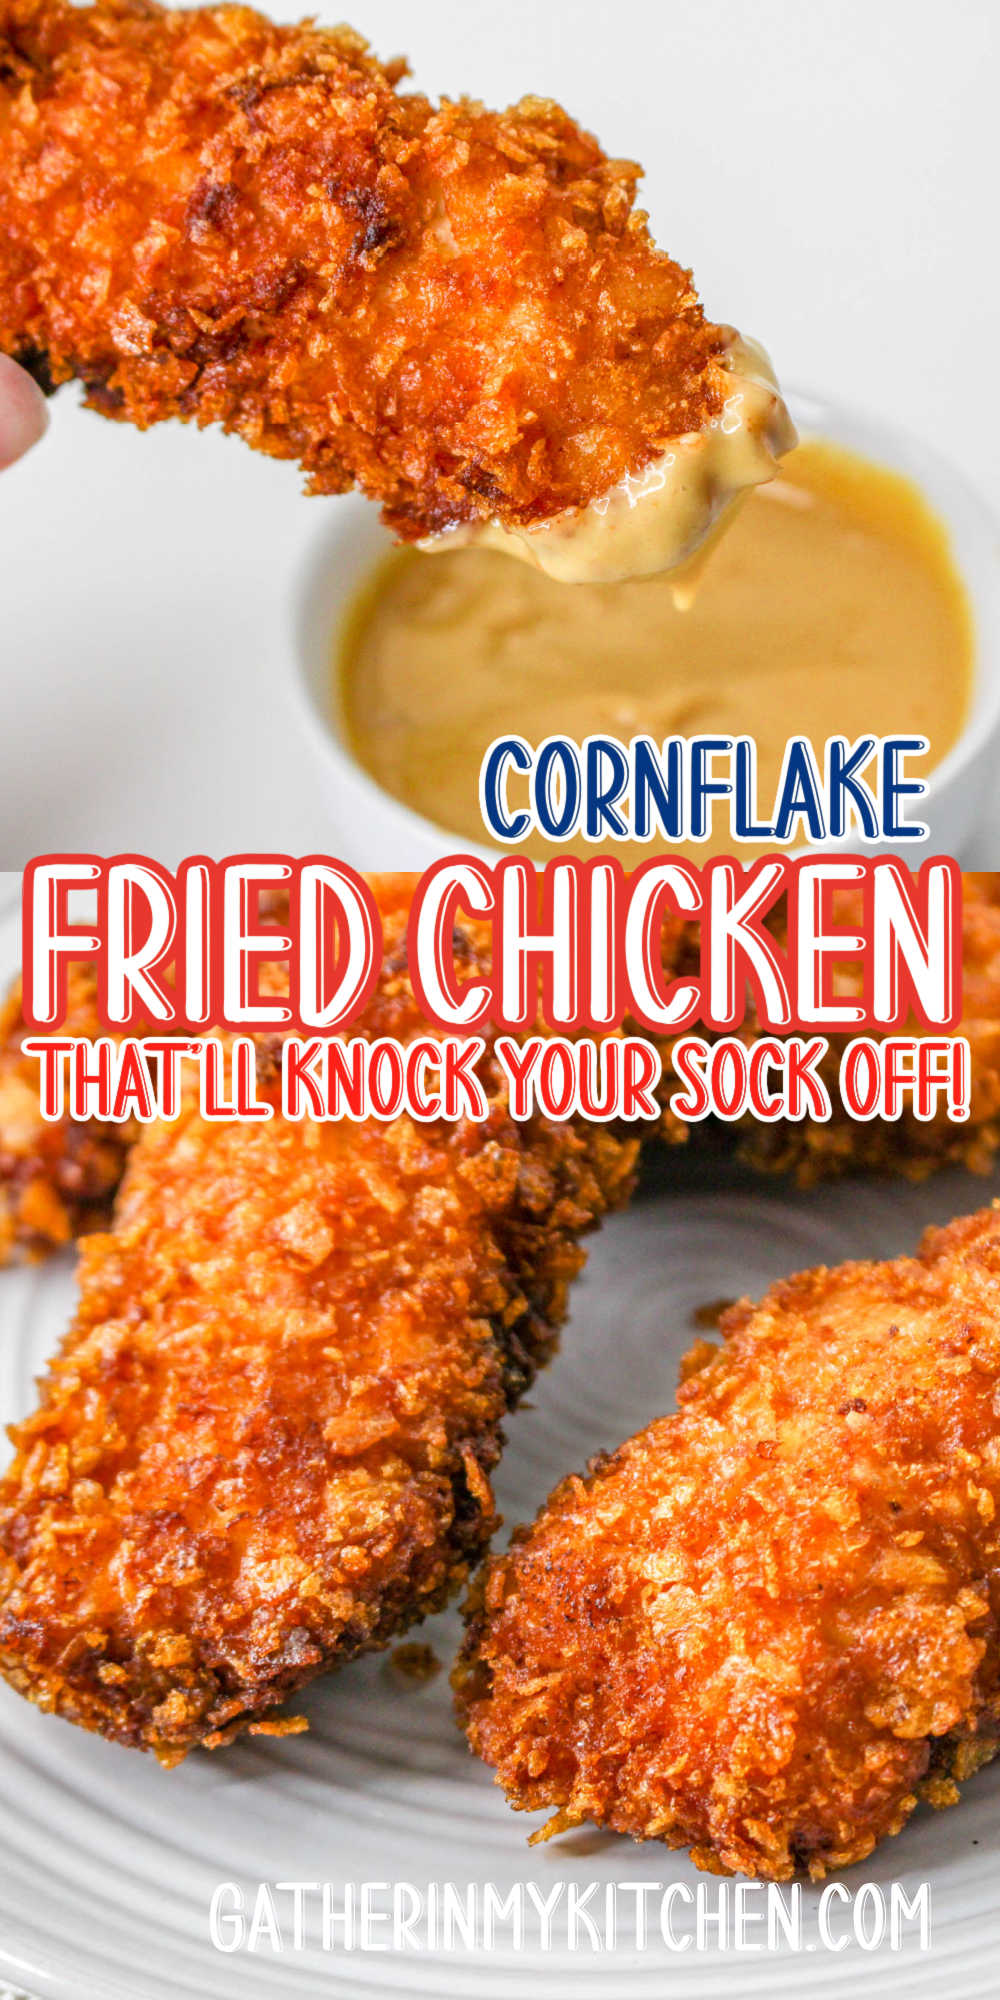 Pin image: top has sauce with cornflake fried chicken dip on it, middle says " Cornflake fried chicken that'll knock your sock off! " and bottom has cornflake fried chicken on a plate.